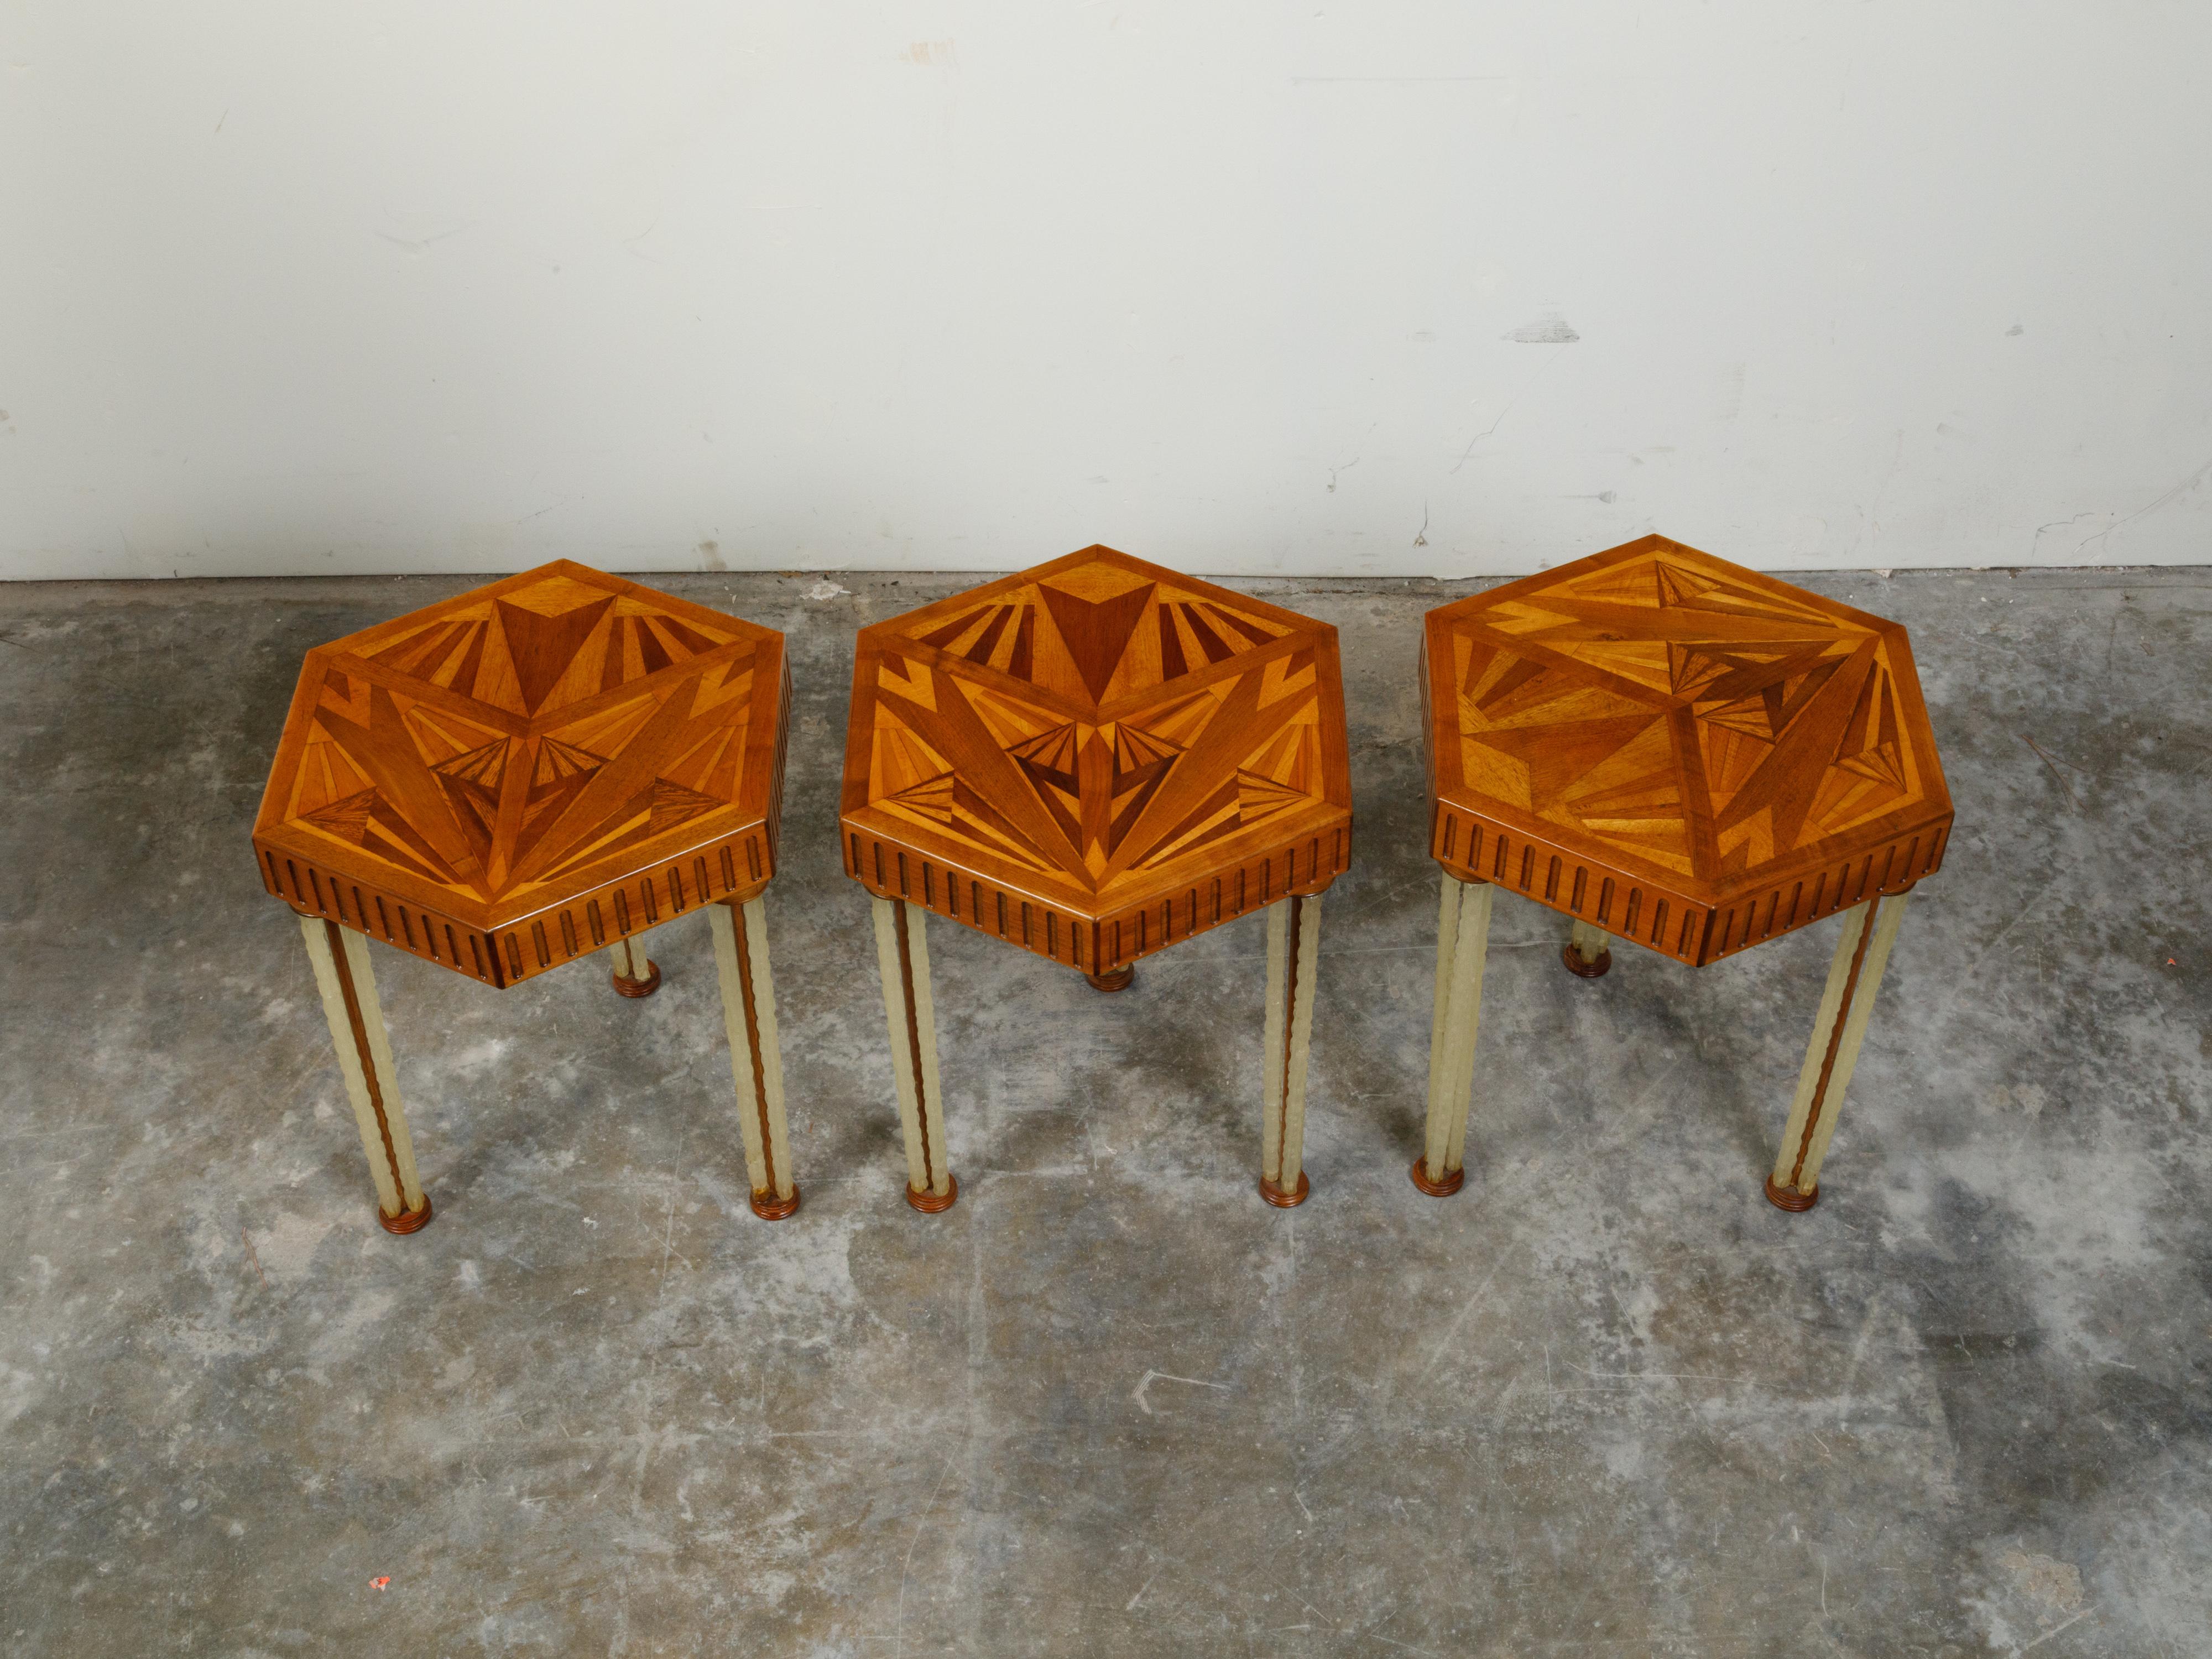 Alabaster Art Deco 1930s Side Tables with Hexagonal Marquetry Tops and Lucite Legs For Sale